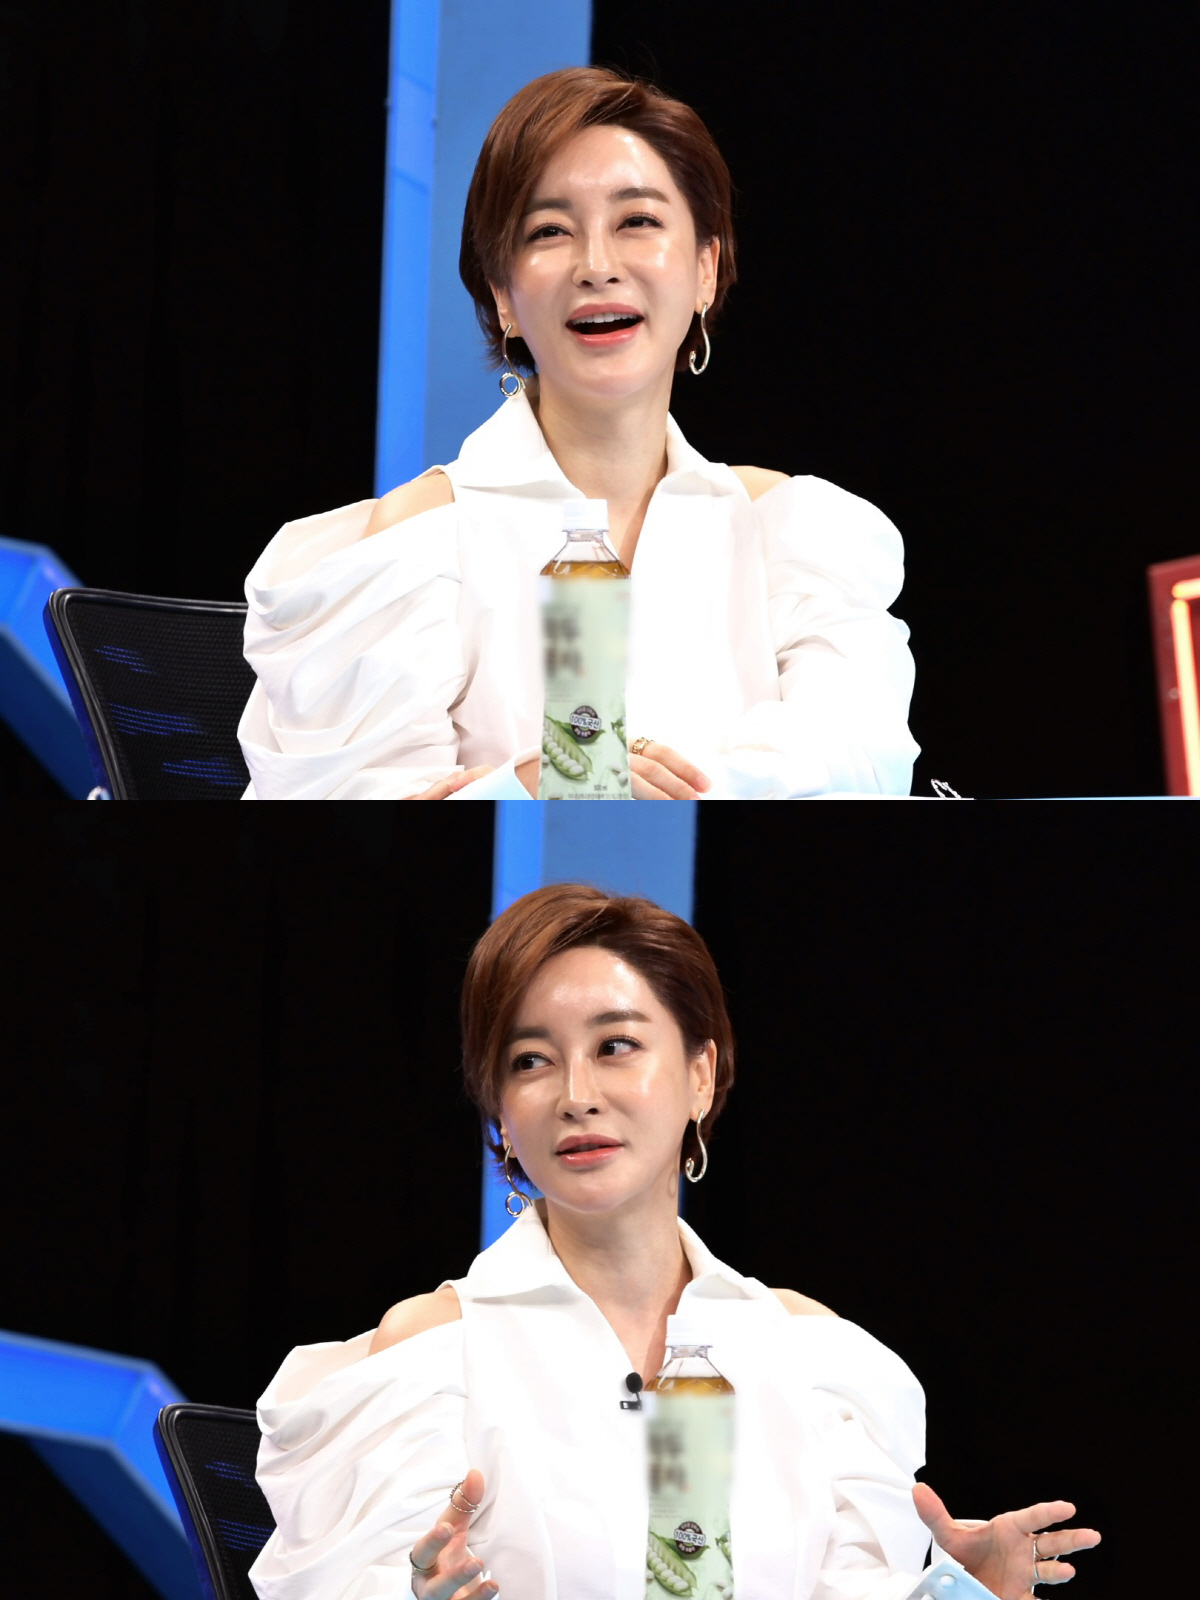 SBS Sangmyonmong Season 2 - You Are My Destiny Actor Kim Hye-eun appears as a special MC.Actor Kim Hye-eun, who was loved as Kang Min-jung, who has a warm humanity in charisma in the recent popular drama Itaewon Clath, will appear on SBS Sangsangmong Season 2 - You Are My Destiny (hereinafter, You Are My Destiny) on the 30th (Monday) at 11 pm.In a recent recording of You Are My Destiny studio, Kim Hye-eun has released an anecdote with a middle school daughter from a love story with a dentist Husband.Kim Hye-eun, who was married for 20 years, said, At first I really did not like Husband.Kim Hye-eun said, It was far from ideal, he said. I made a joke about putting an elephant in the refrigerator.So this person thought that it was not so funny, so I thought I should not. Kim Hye-eun, who developed into a lover with Husband and married, has a middle school daughter.Kim Hye-eun attracted attention because he asked Actor Park Seo-joon, who was breathing in the drama Itaewon Clath because of his daughter.Kim Hye-eun said, When I go to the filming, the conversation with my daughter is Park Seo-joon all over. She said her daughter is a fan of Park Seo-joon.The connection to Park Seo-joon keeps me talking to my daughter.Kim Hye-eun said, Seo Jun-yi told me that he asked me to be close to his daughter until she went to college.You Are My Destiny, starring Special MC Actor Kim Hye-eun, can be seen on SBS You Are My Destiny, which airs at 11 p.m. on the 30th (Month).